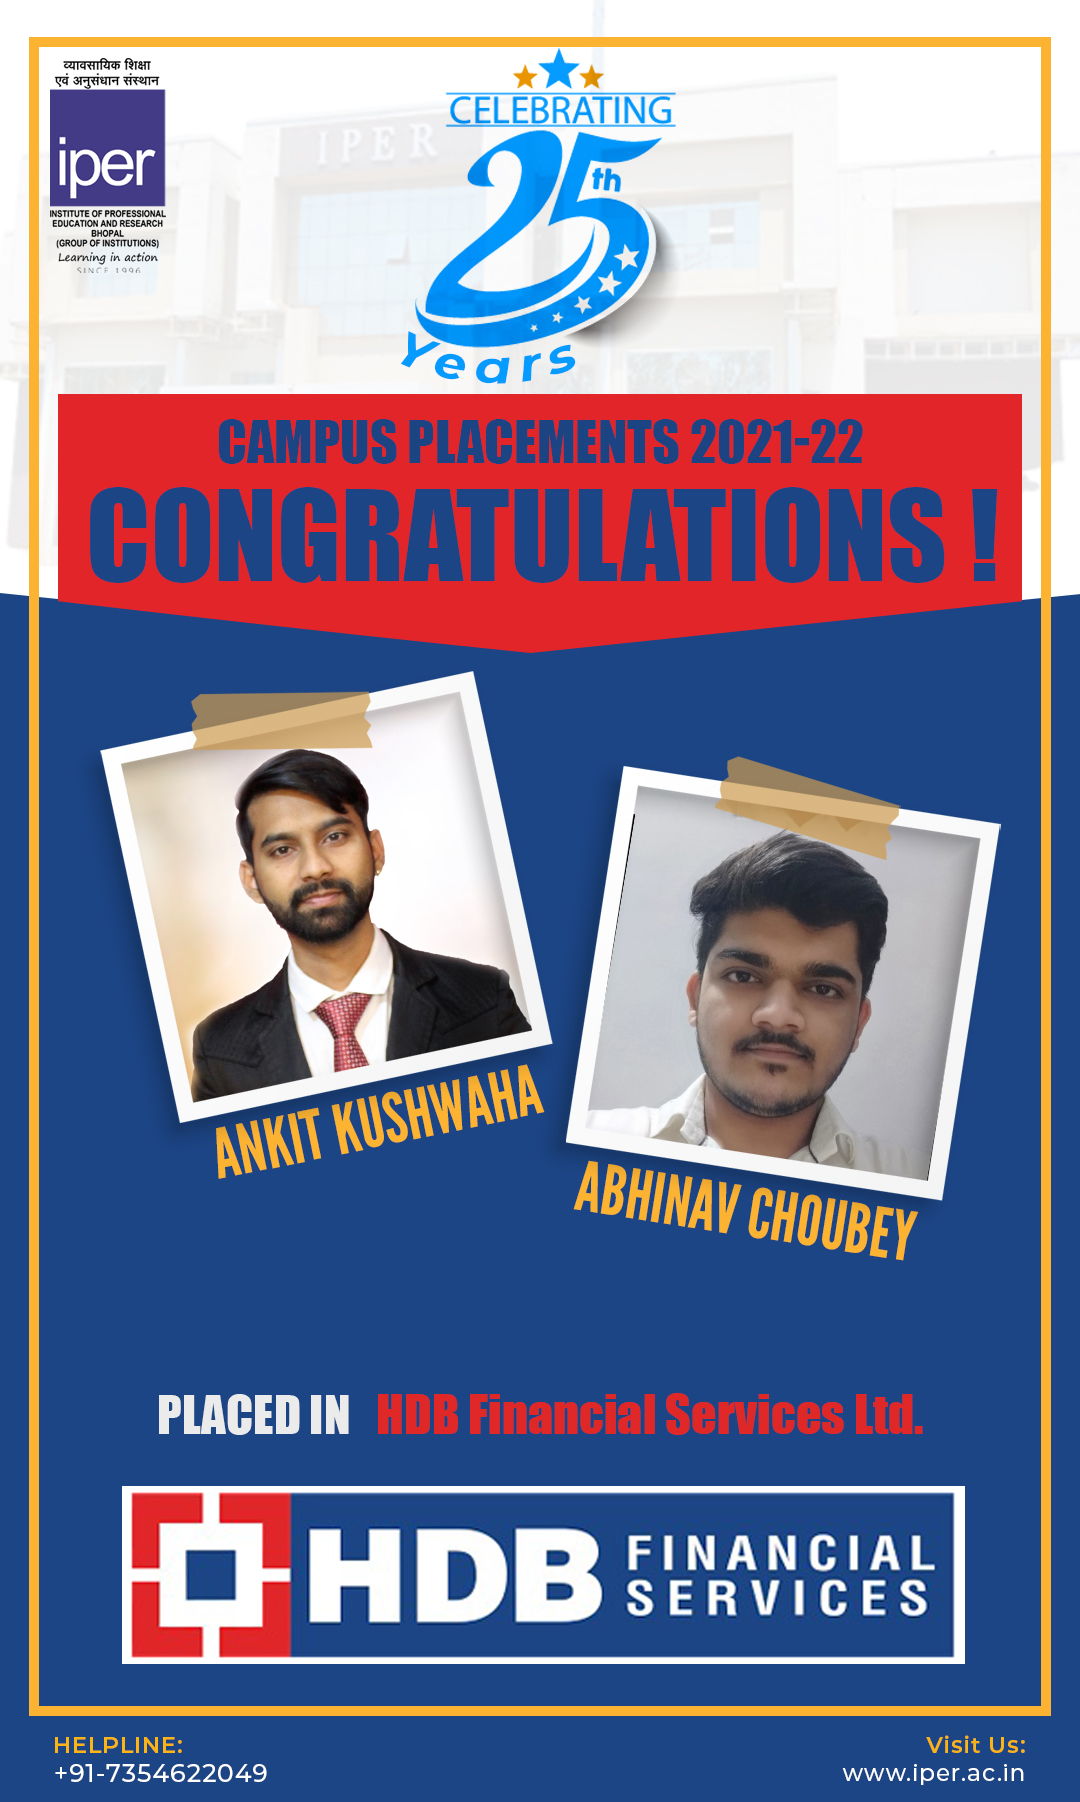 CAMPUS PLACEMENTS 2021-22 (Layout 5) HDB Financial Services Ltd.